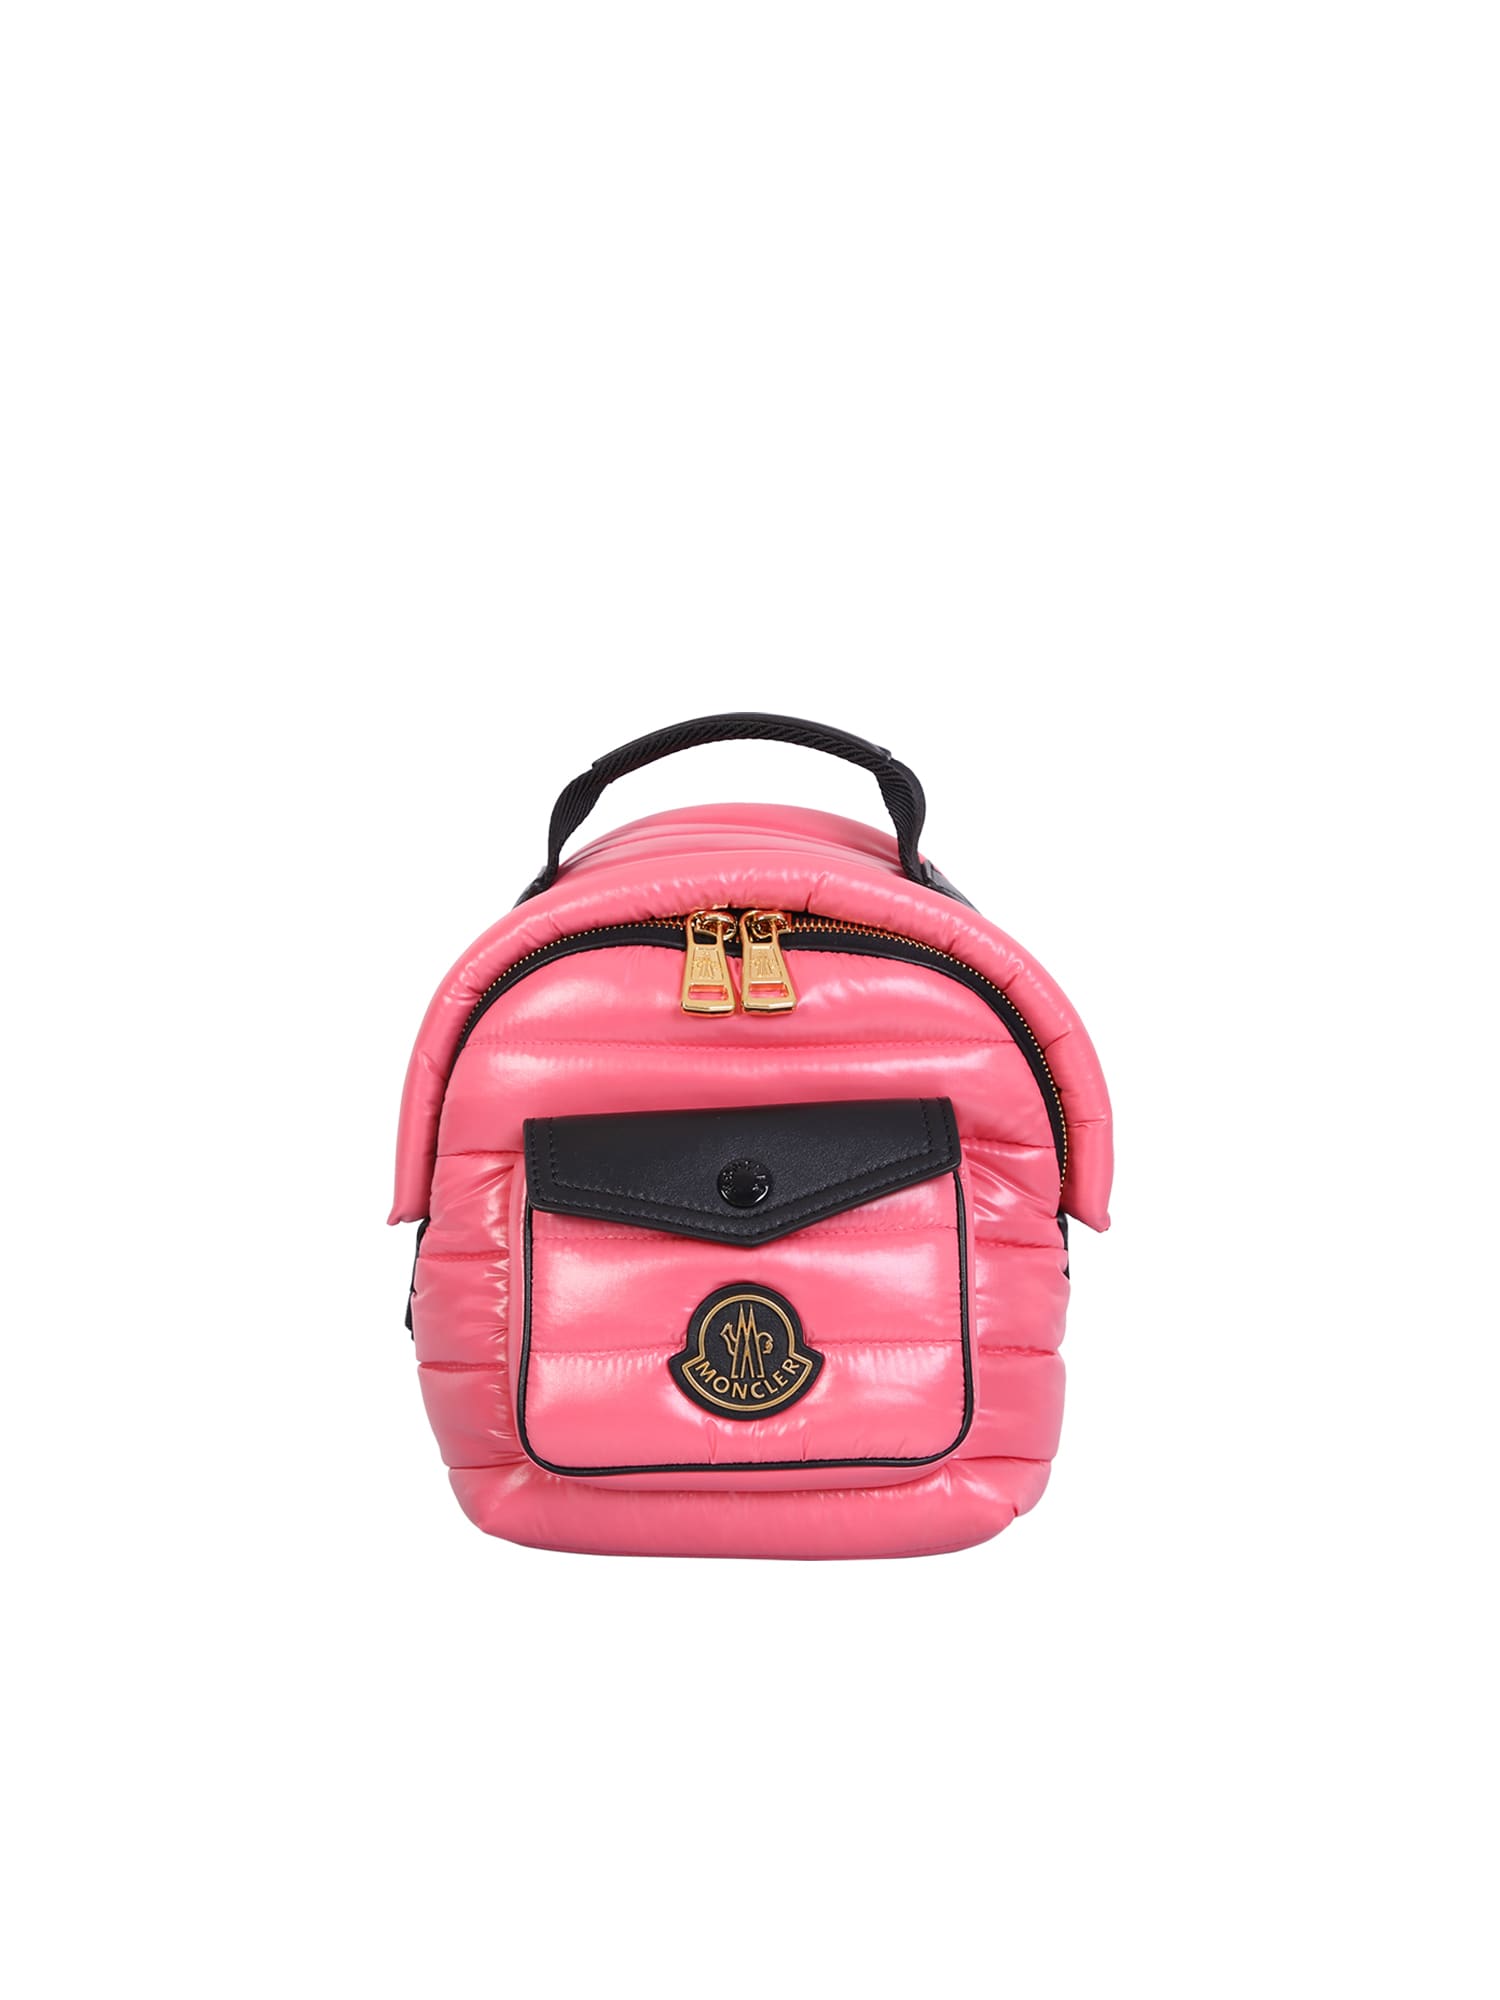 Backpacks Moncler - Mini Dauphine backpack in red -  5L7020002SA9455MINIDAUPHINE